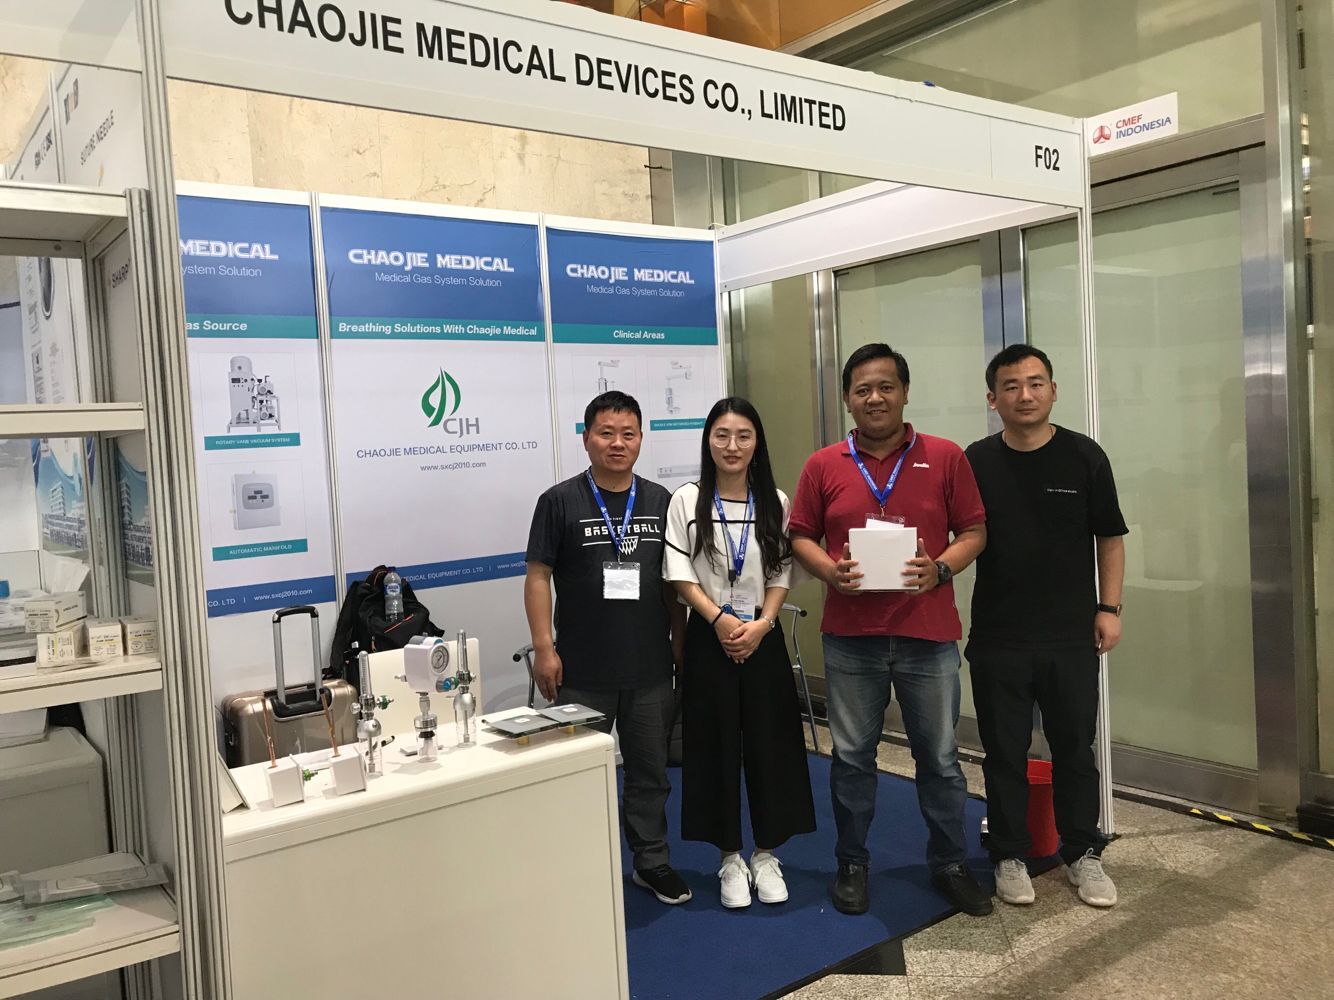 Chaojie medical attended the CMEF Indonesia 2019